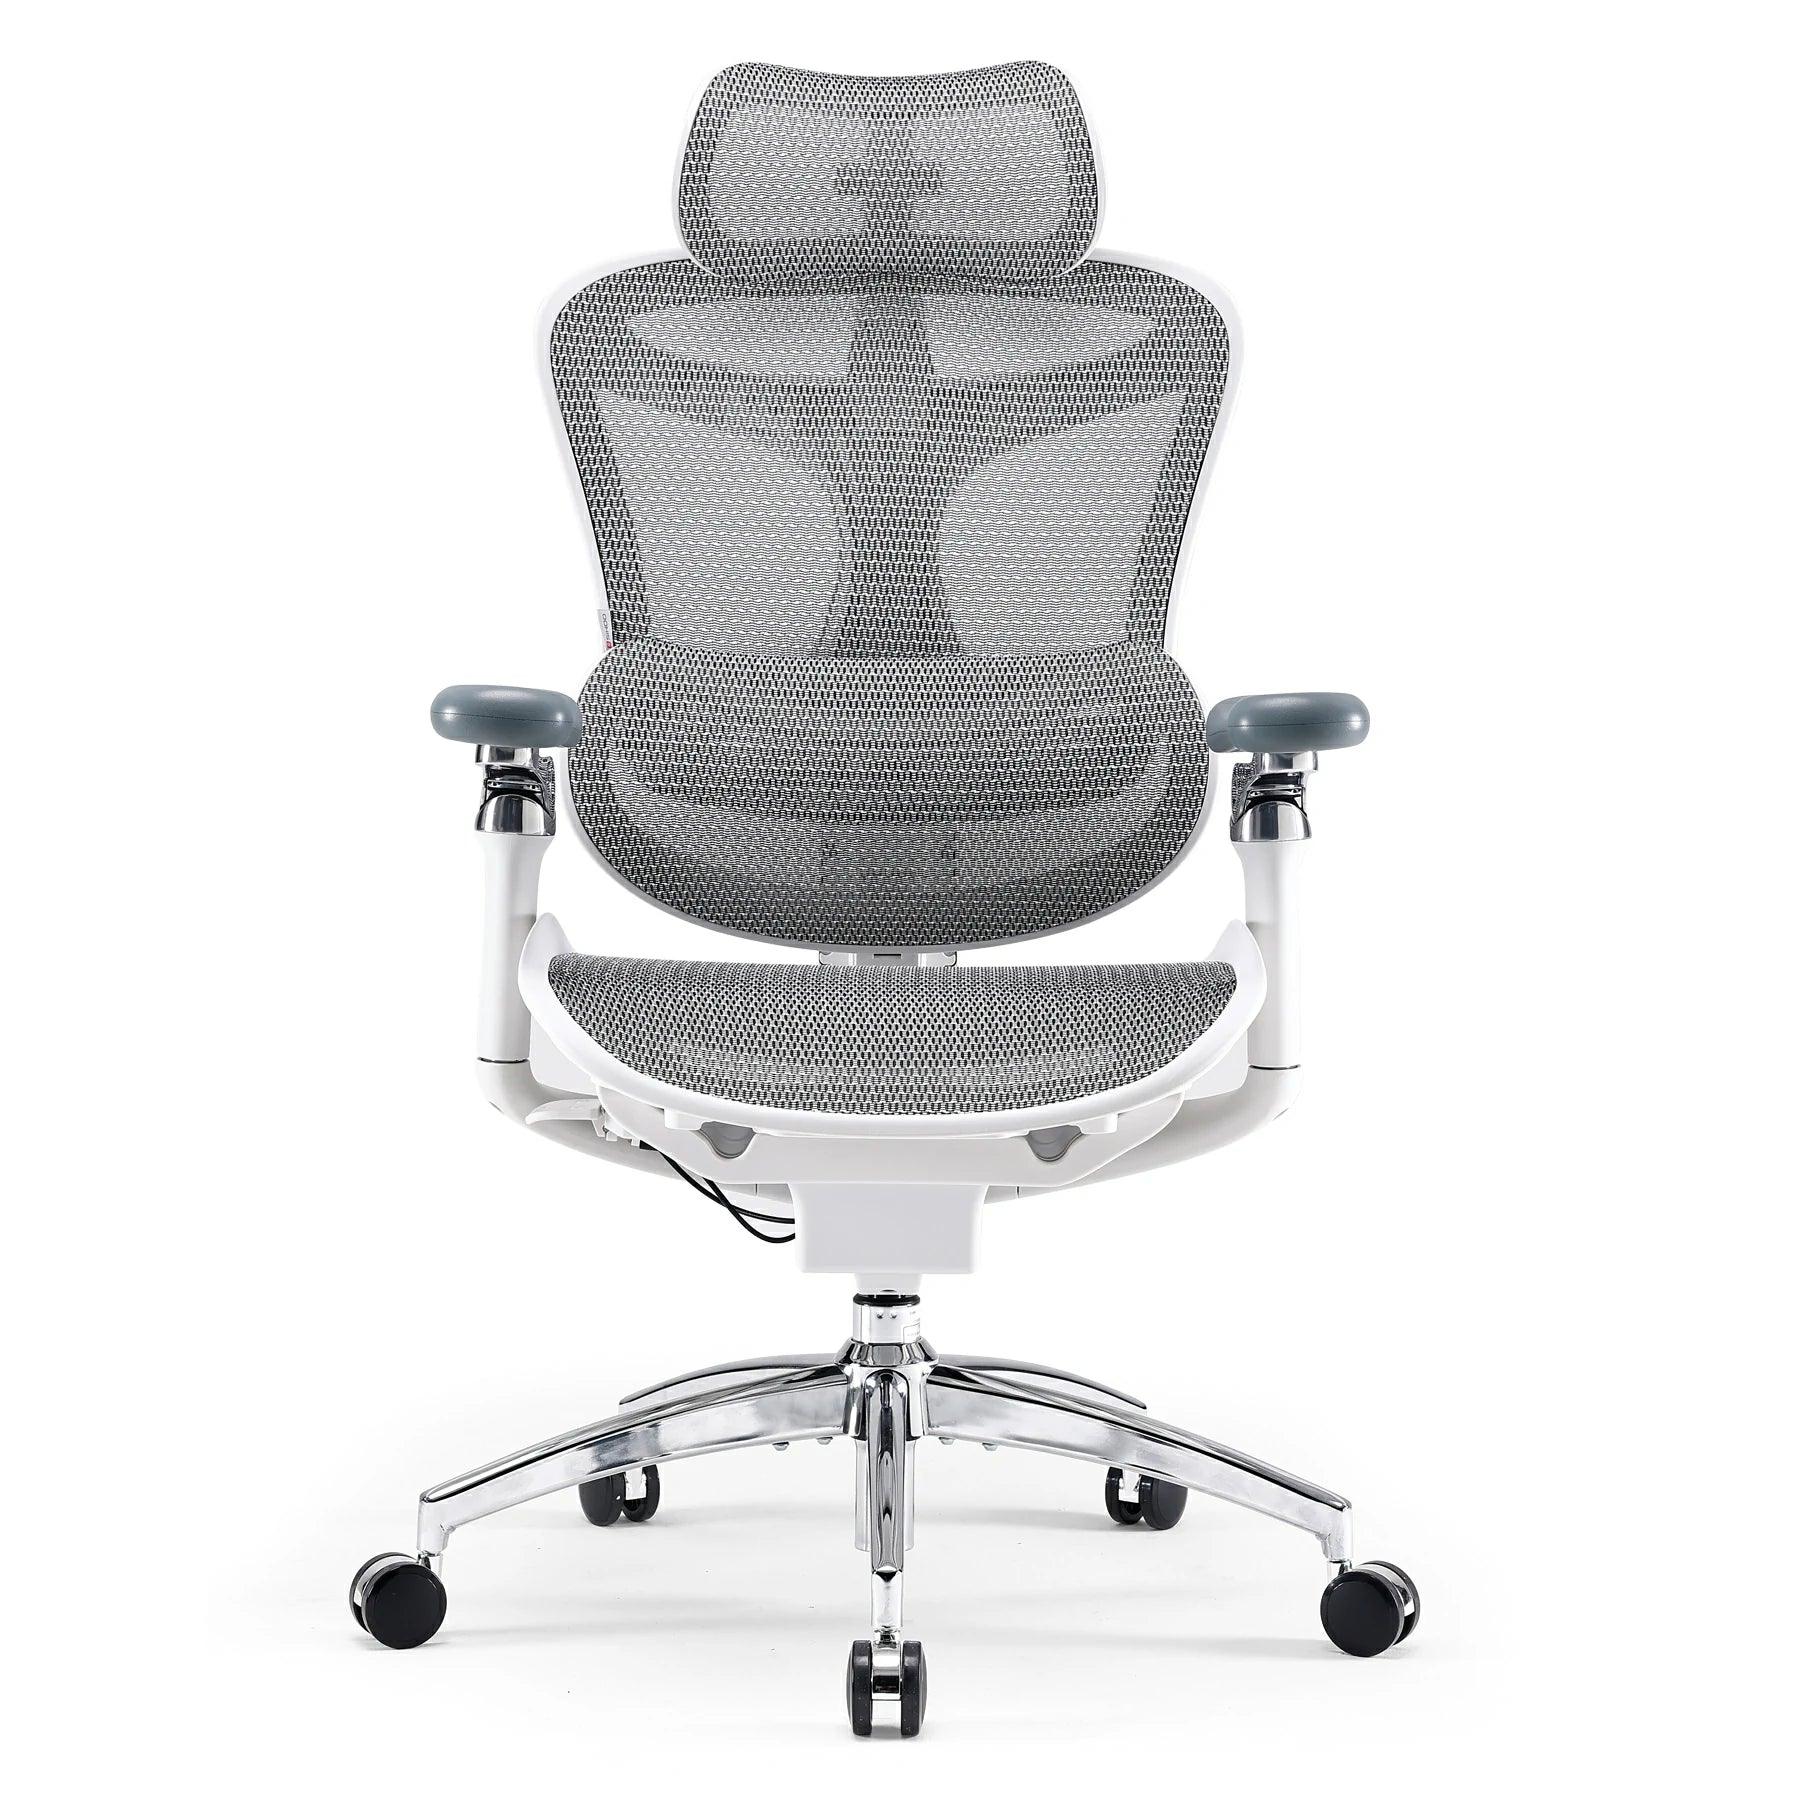 should i get the SIHOO M18? : r/OfficeChairs